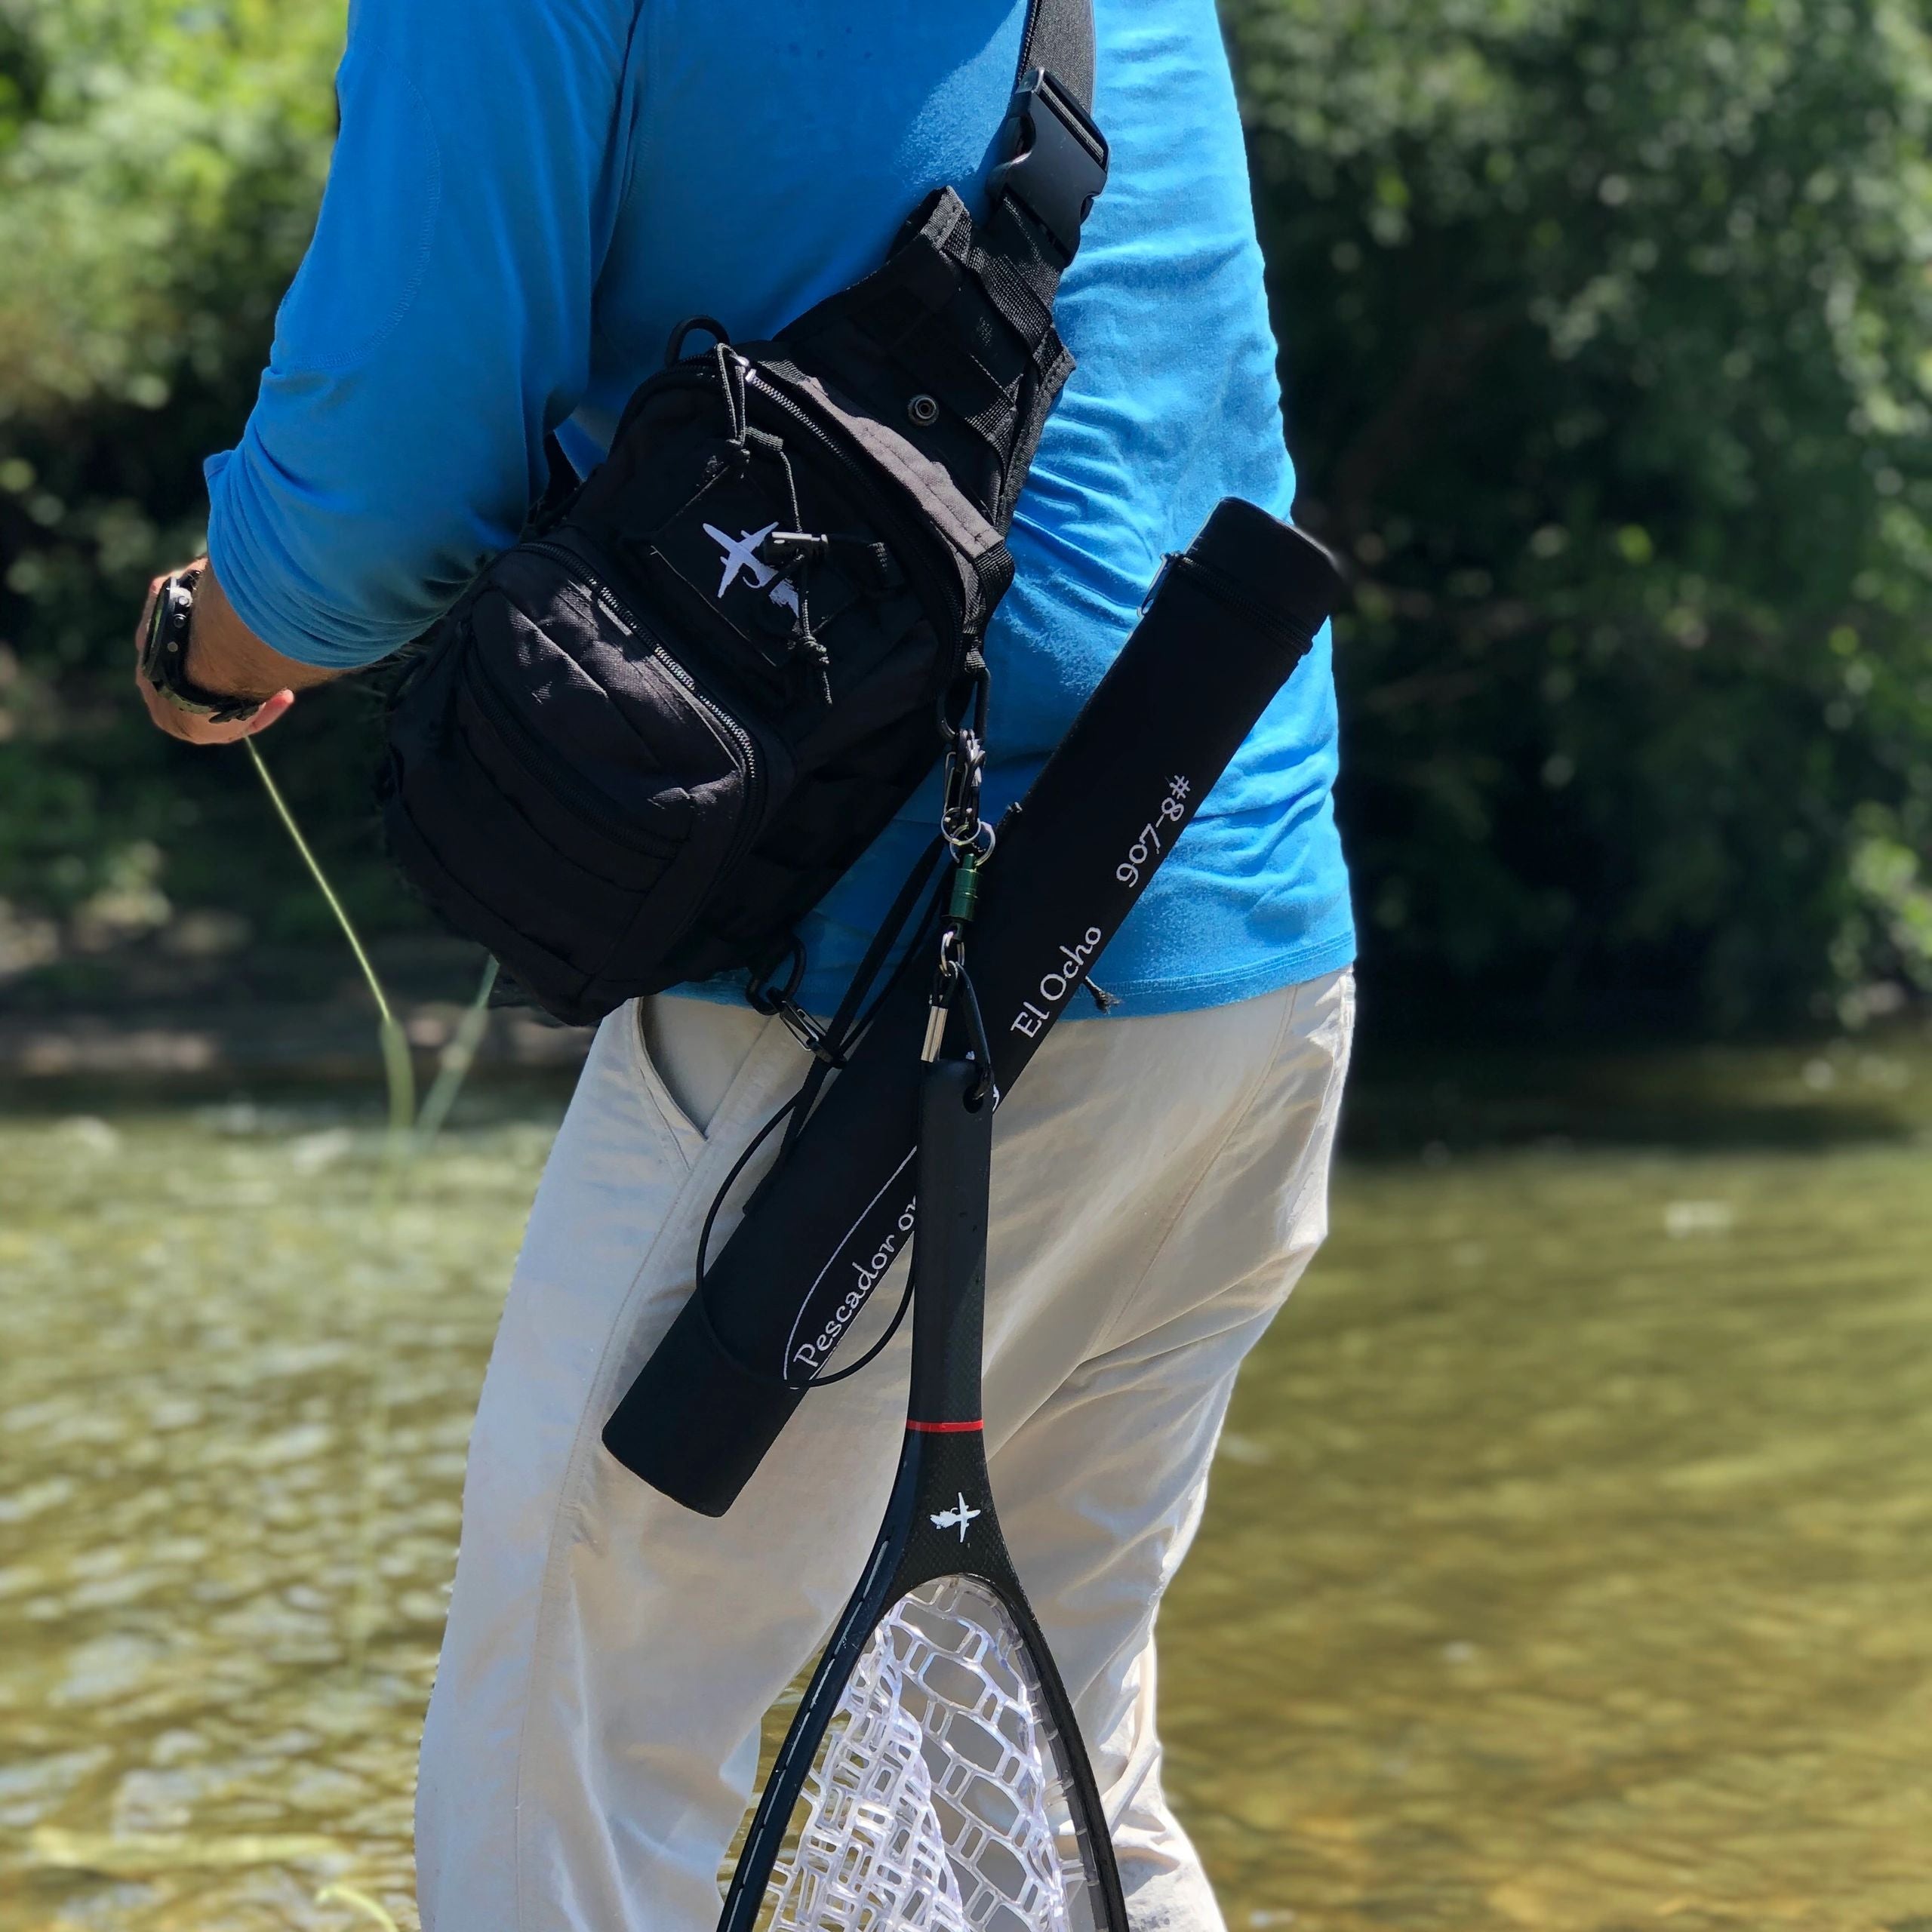 GO-PACK SLING PACK | BUDGET FRIENDLY FLY FISHING SLING PACK